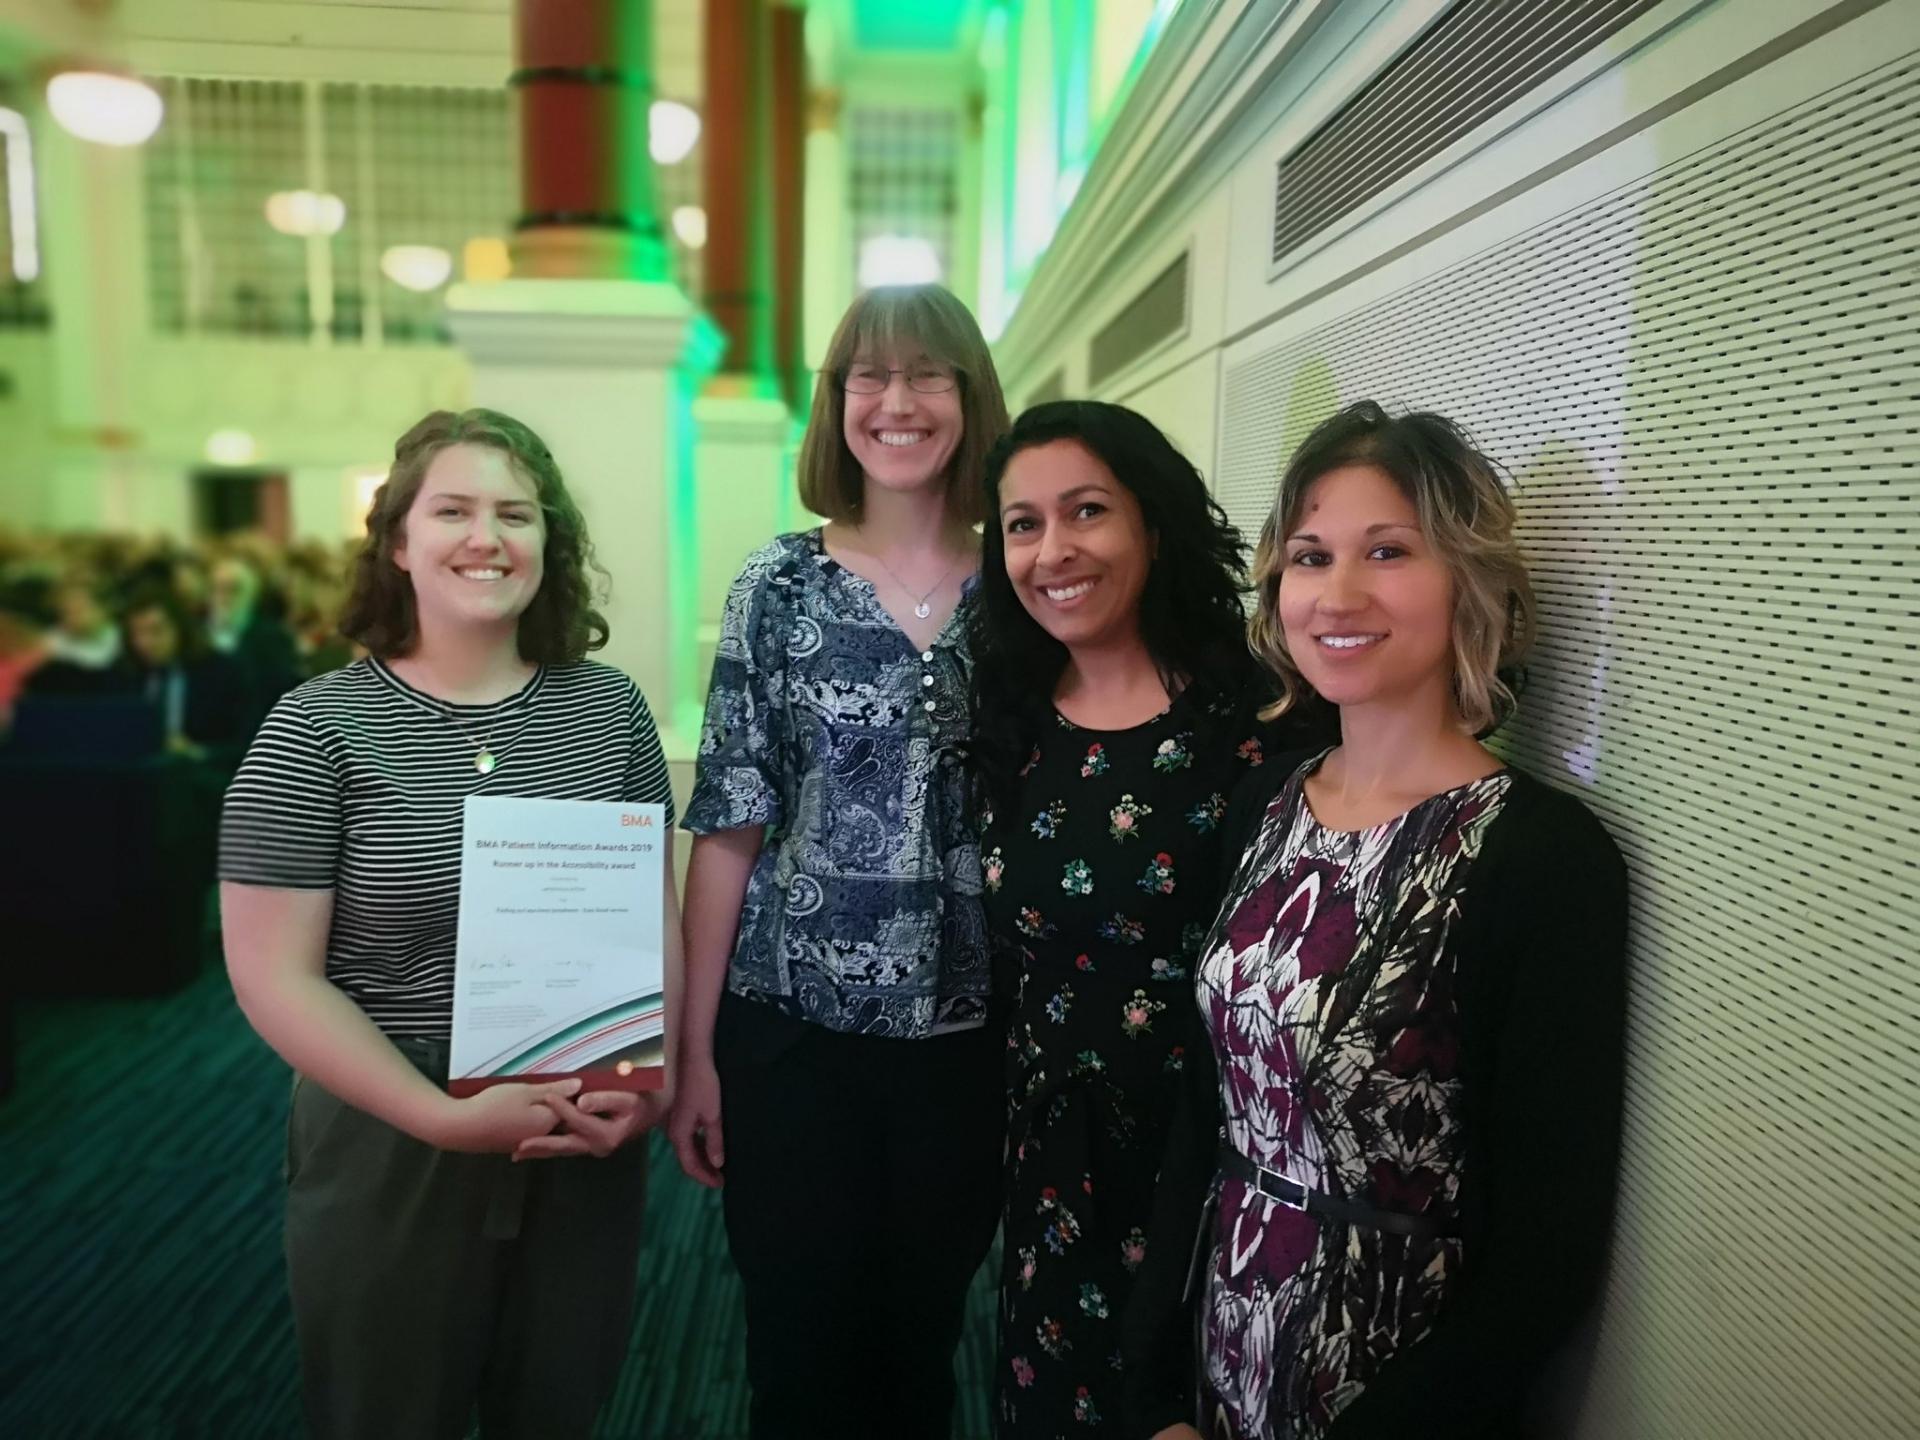 Publications Team with one of their awards